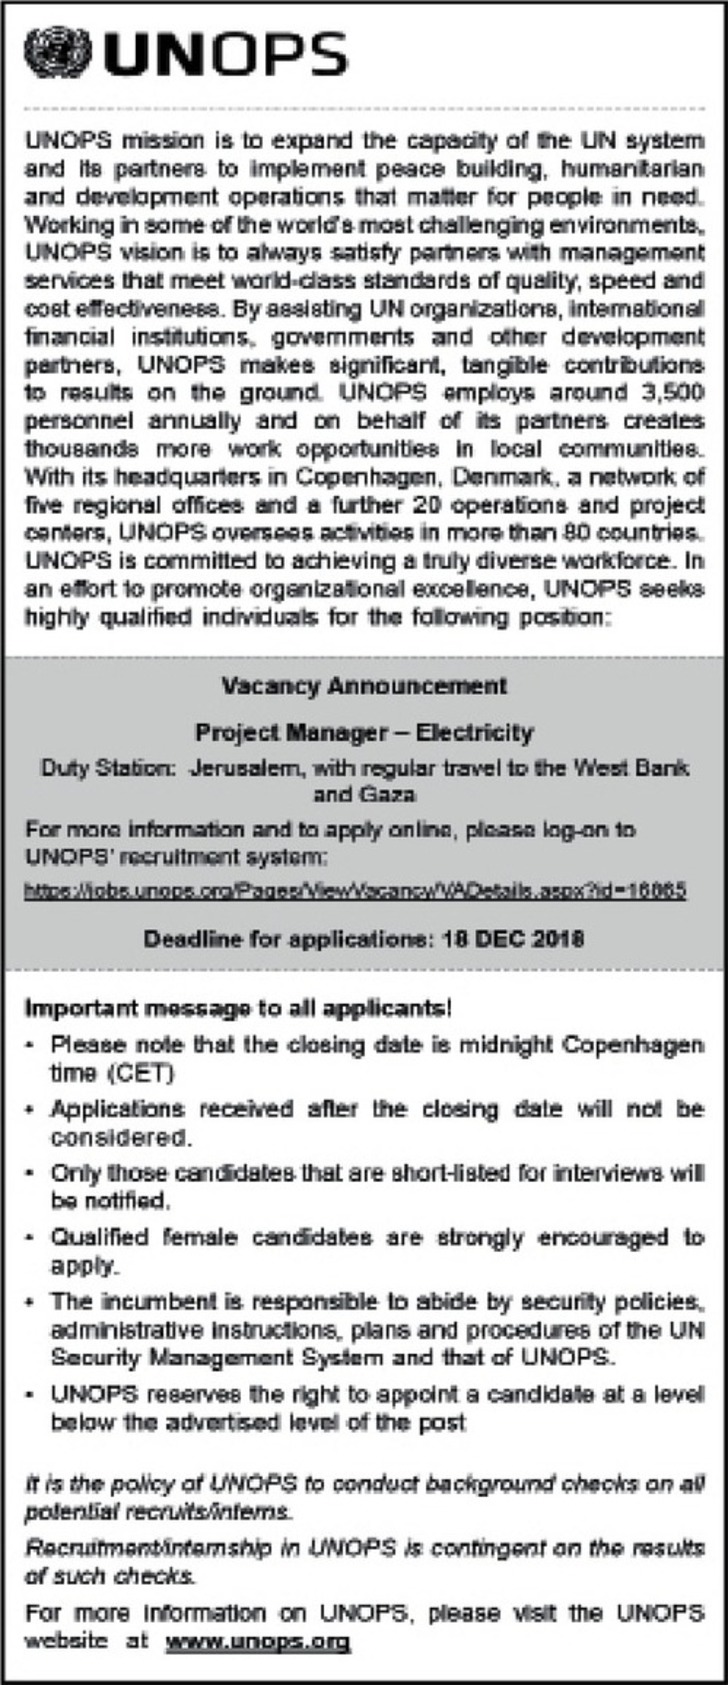 Project manager- Electricity